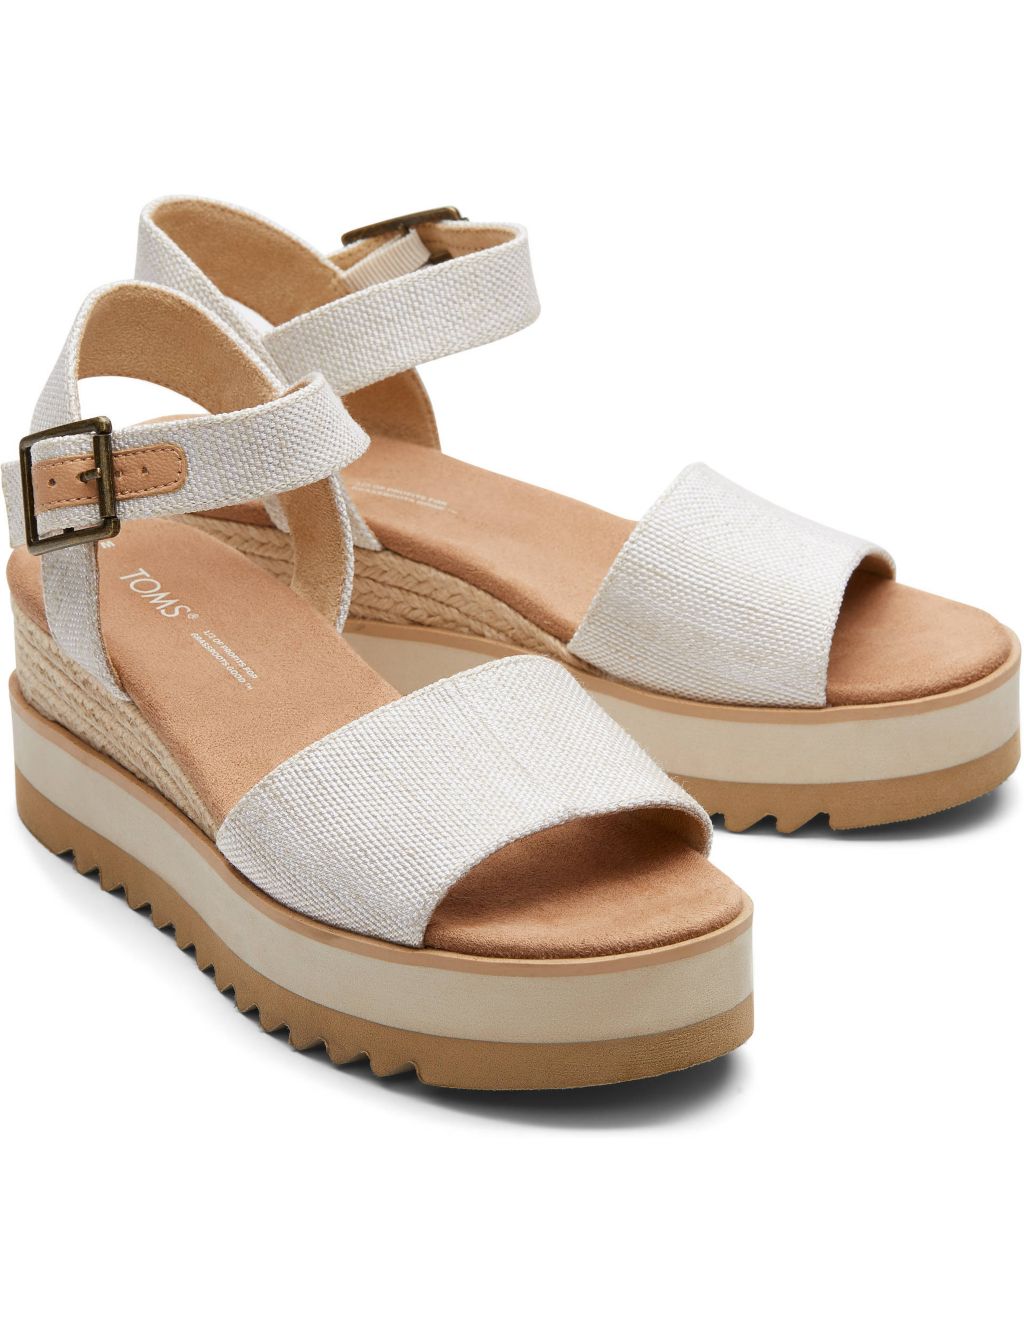 Canvas Buckle Ankle Strap Wedge Espadrilles image 2